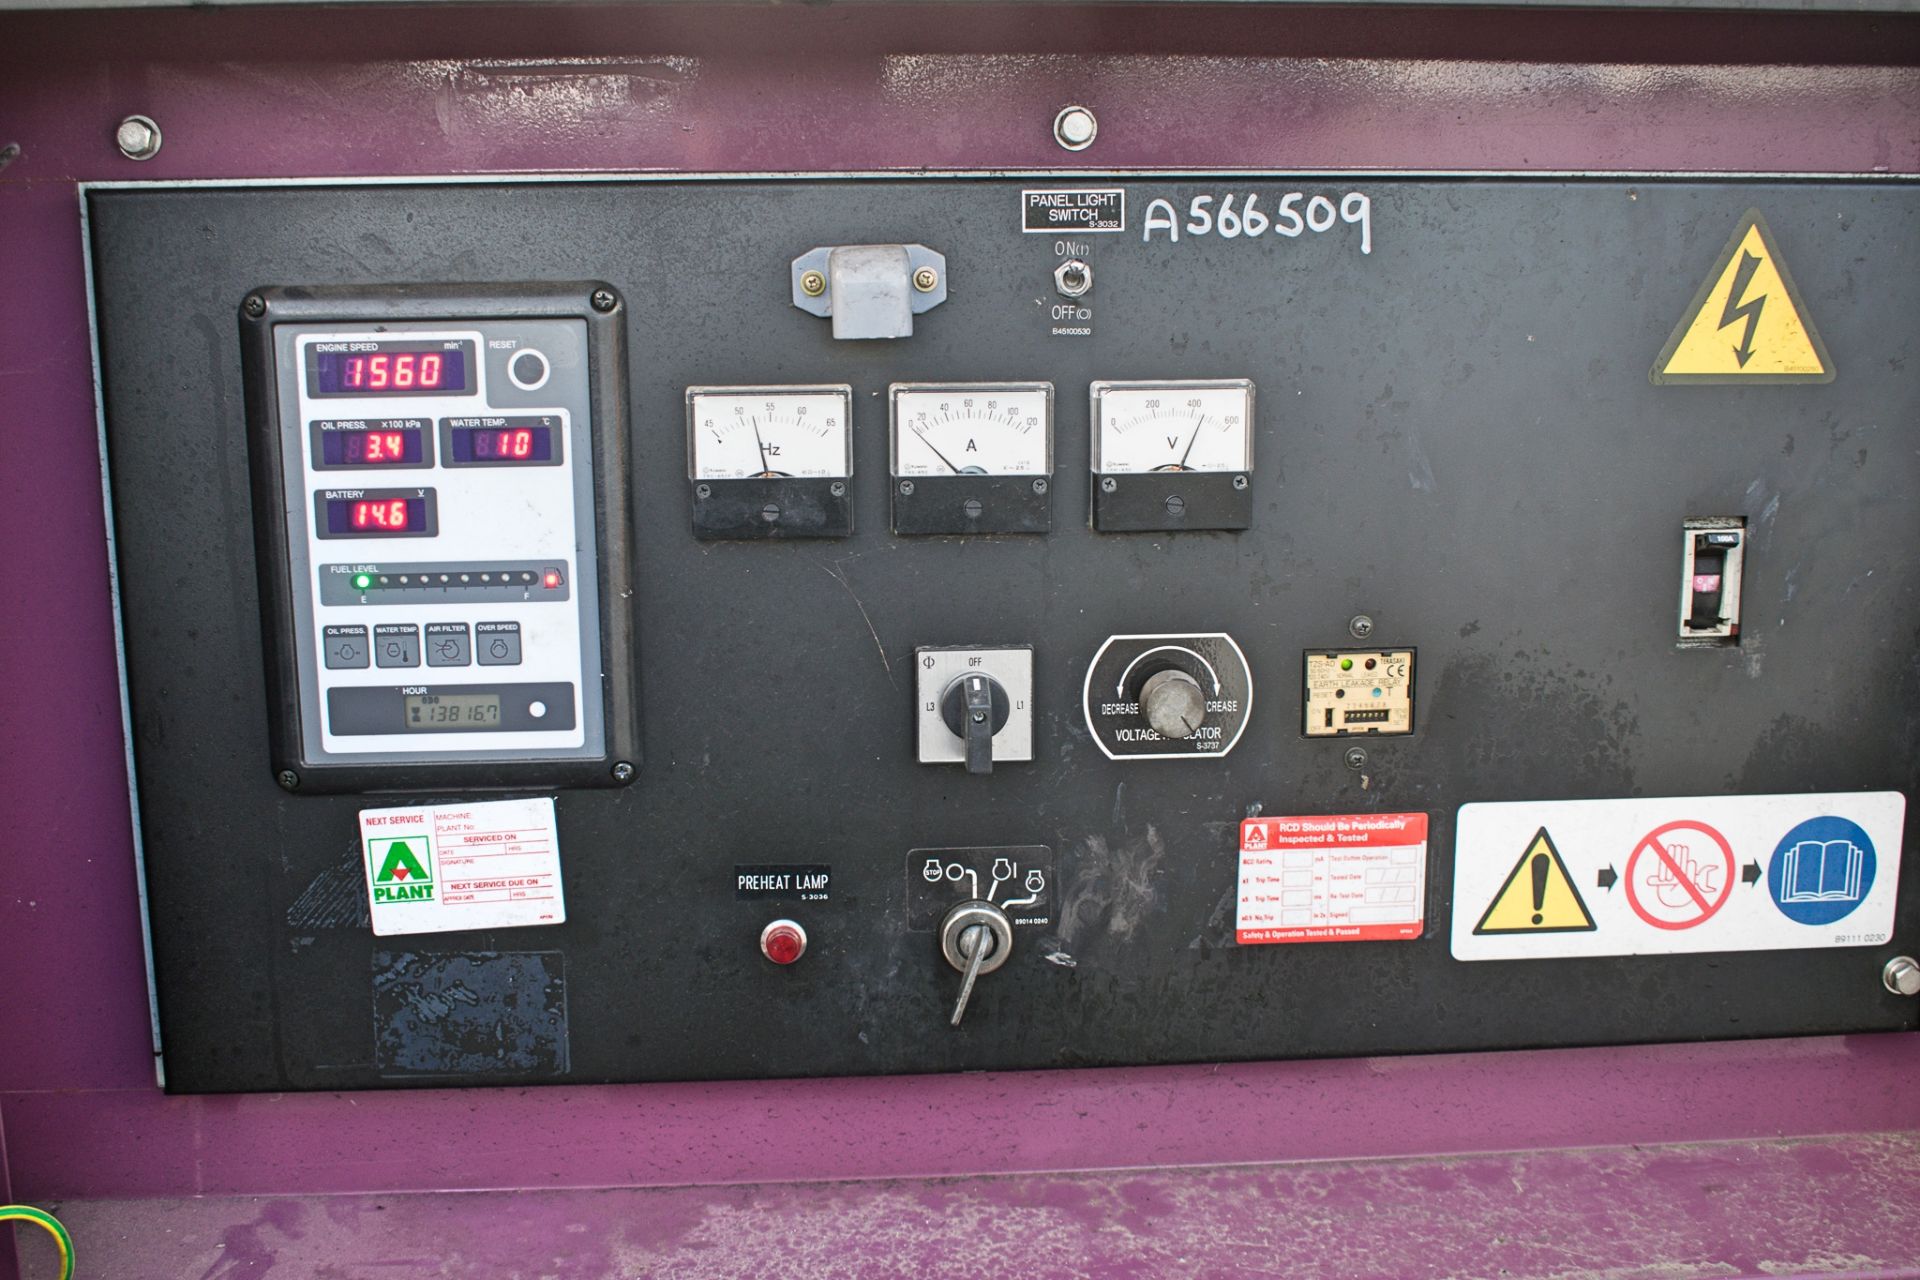 Denyo DCA-70 50 kva diesel driven generator Year: 2011 S/N: 3849695 Recorded Hours: 13,816 A566509 - Image 5 of 8